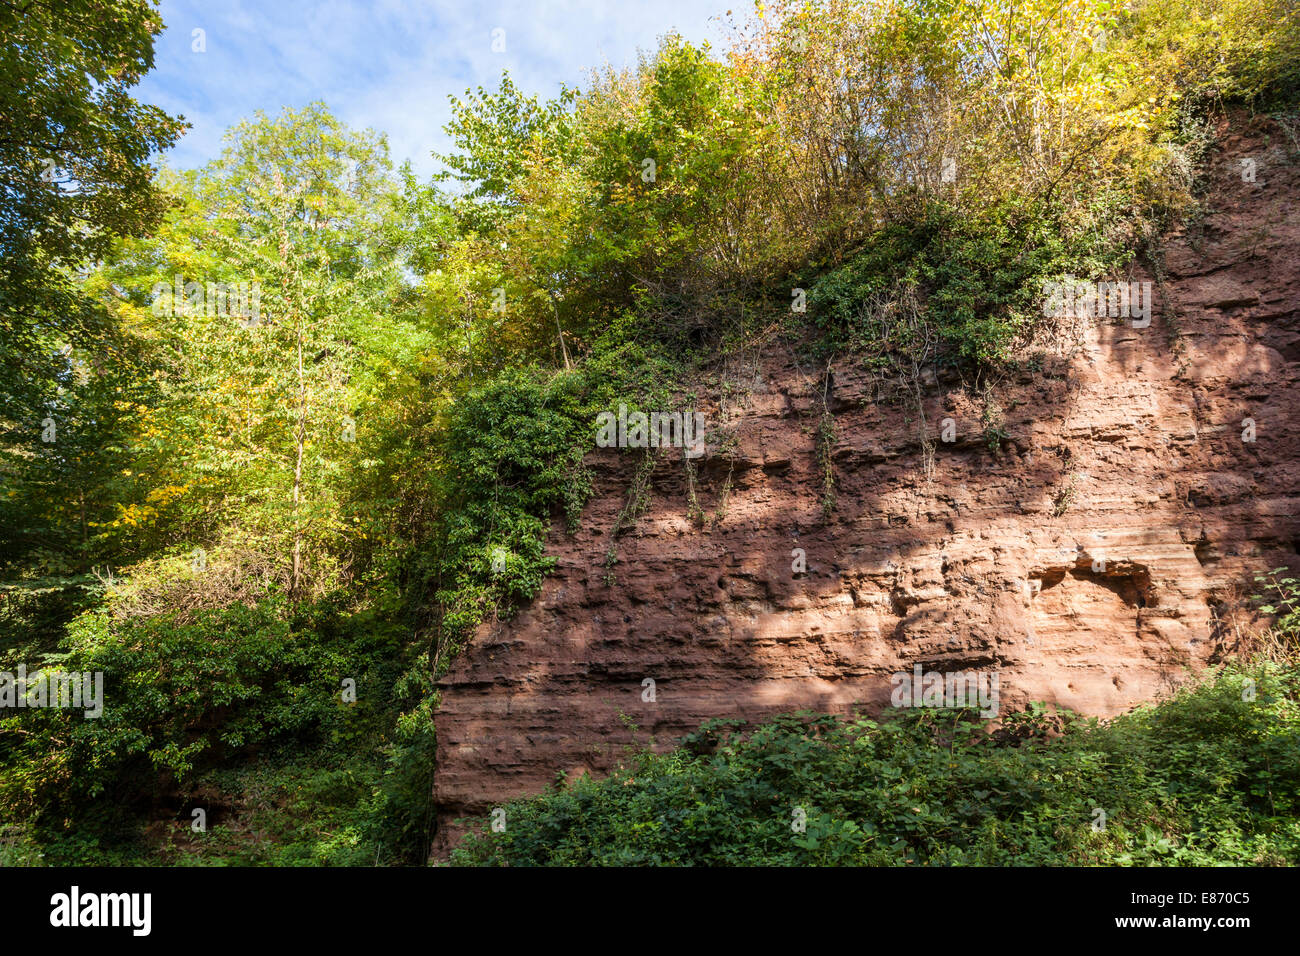 Triassic cliff face of mudstone, siltstone and sandstone at Colwick Cutting, a Site of Special Scientific Interest (SSSI), Nottingham, England, UK Stock Photo